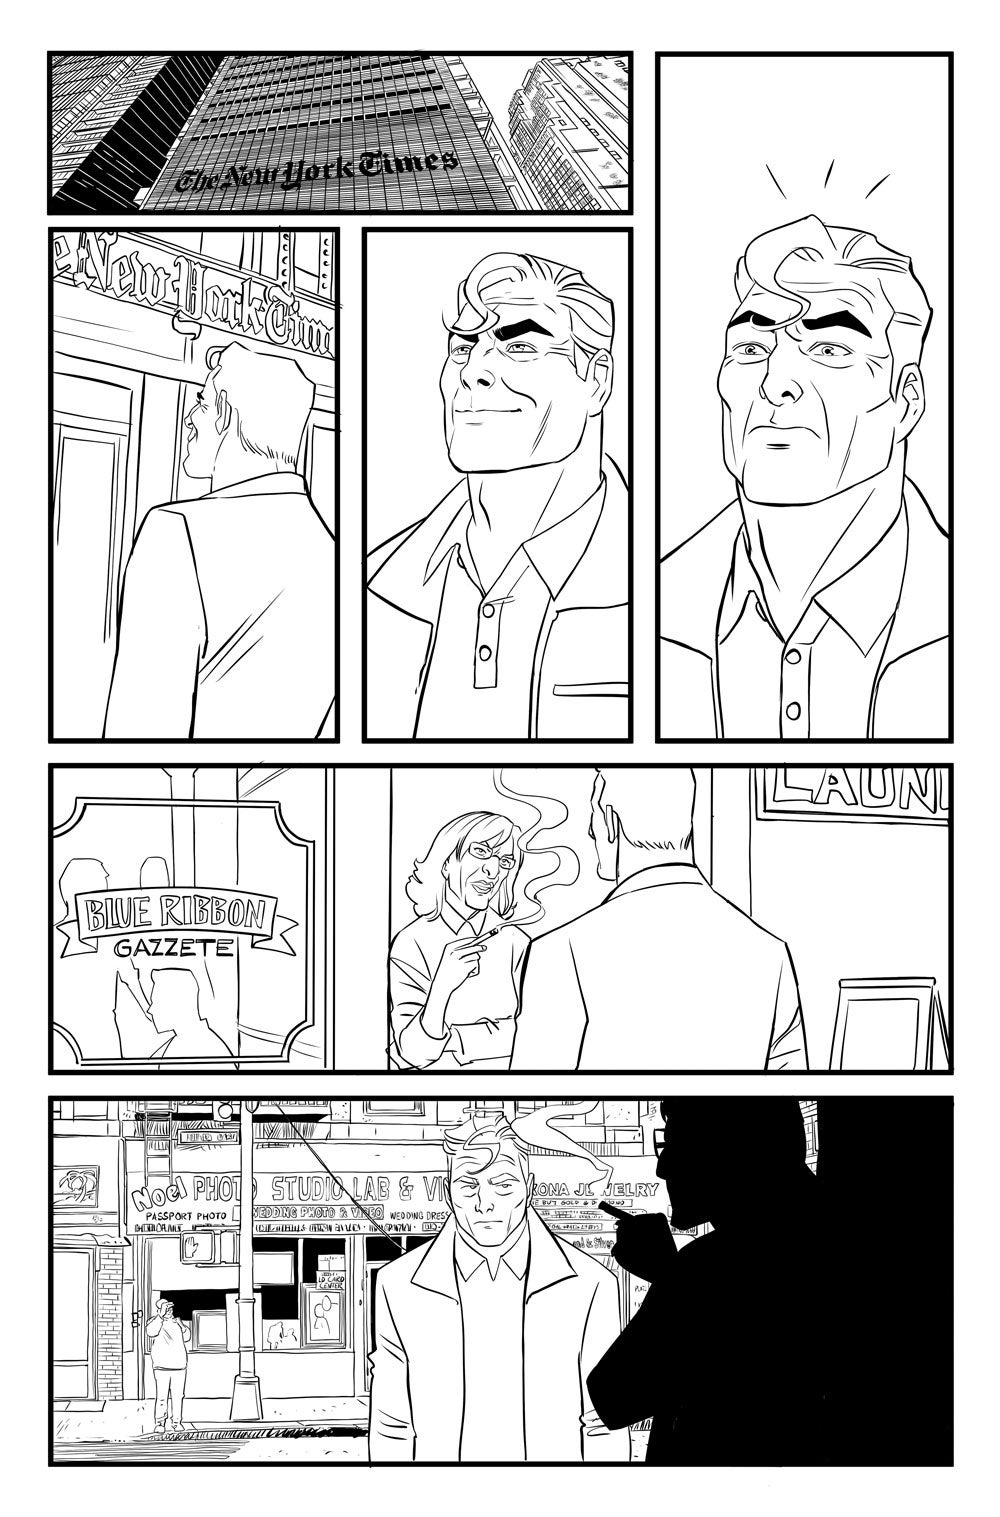 Black and white interior comics art featuring a man walking into a building